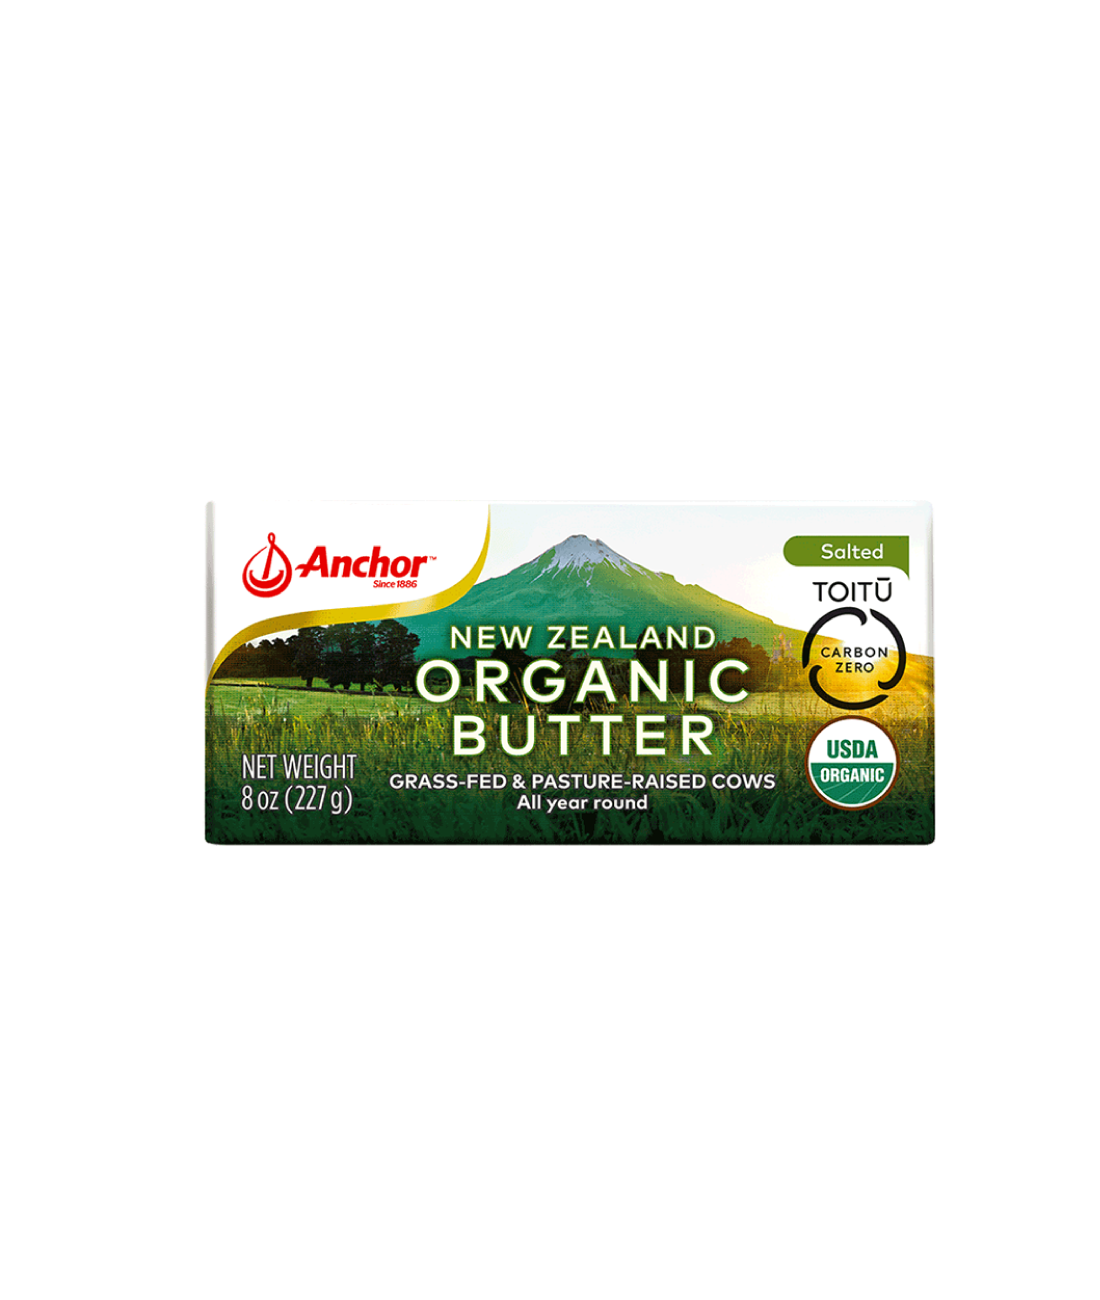 Anchor Organic carbonzero Certified Salted Butter​